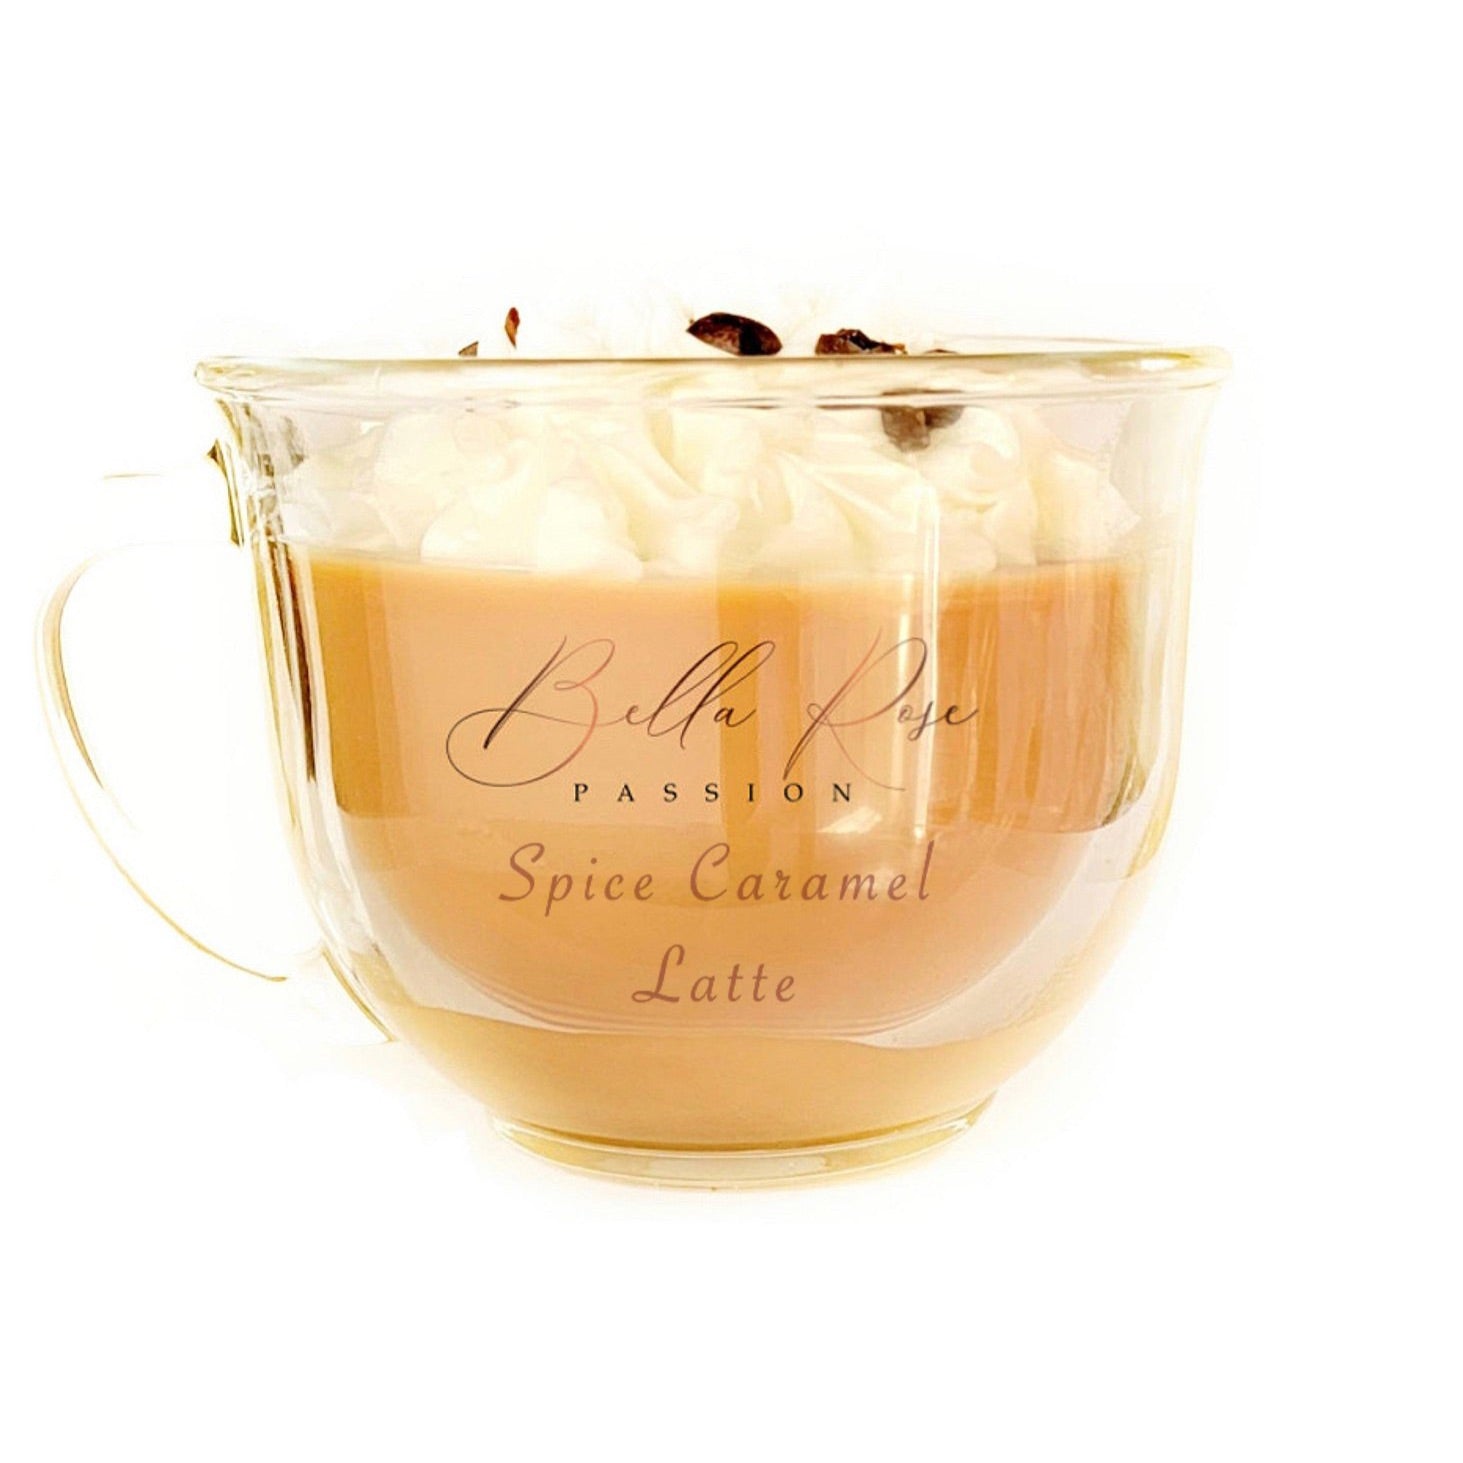 Spiced Caramel Latte Candle - Bella Rose Passion